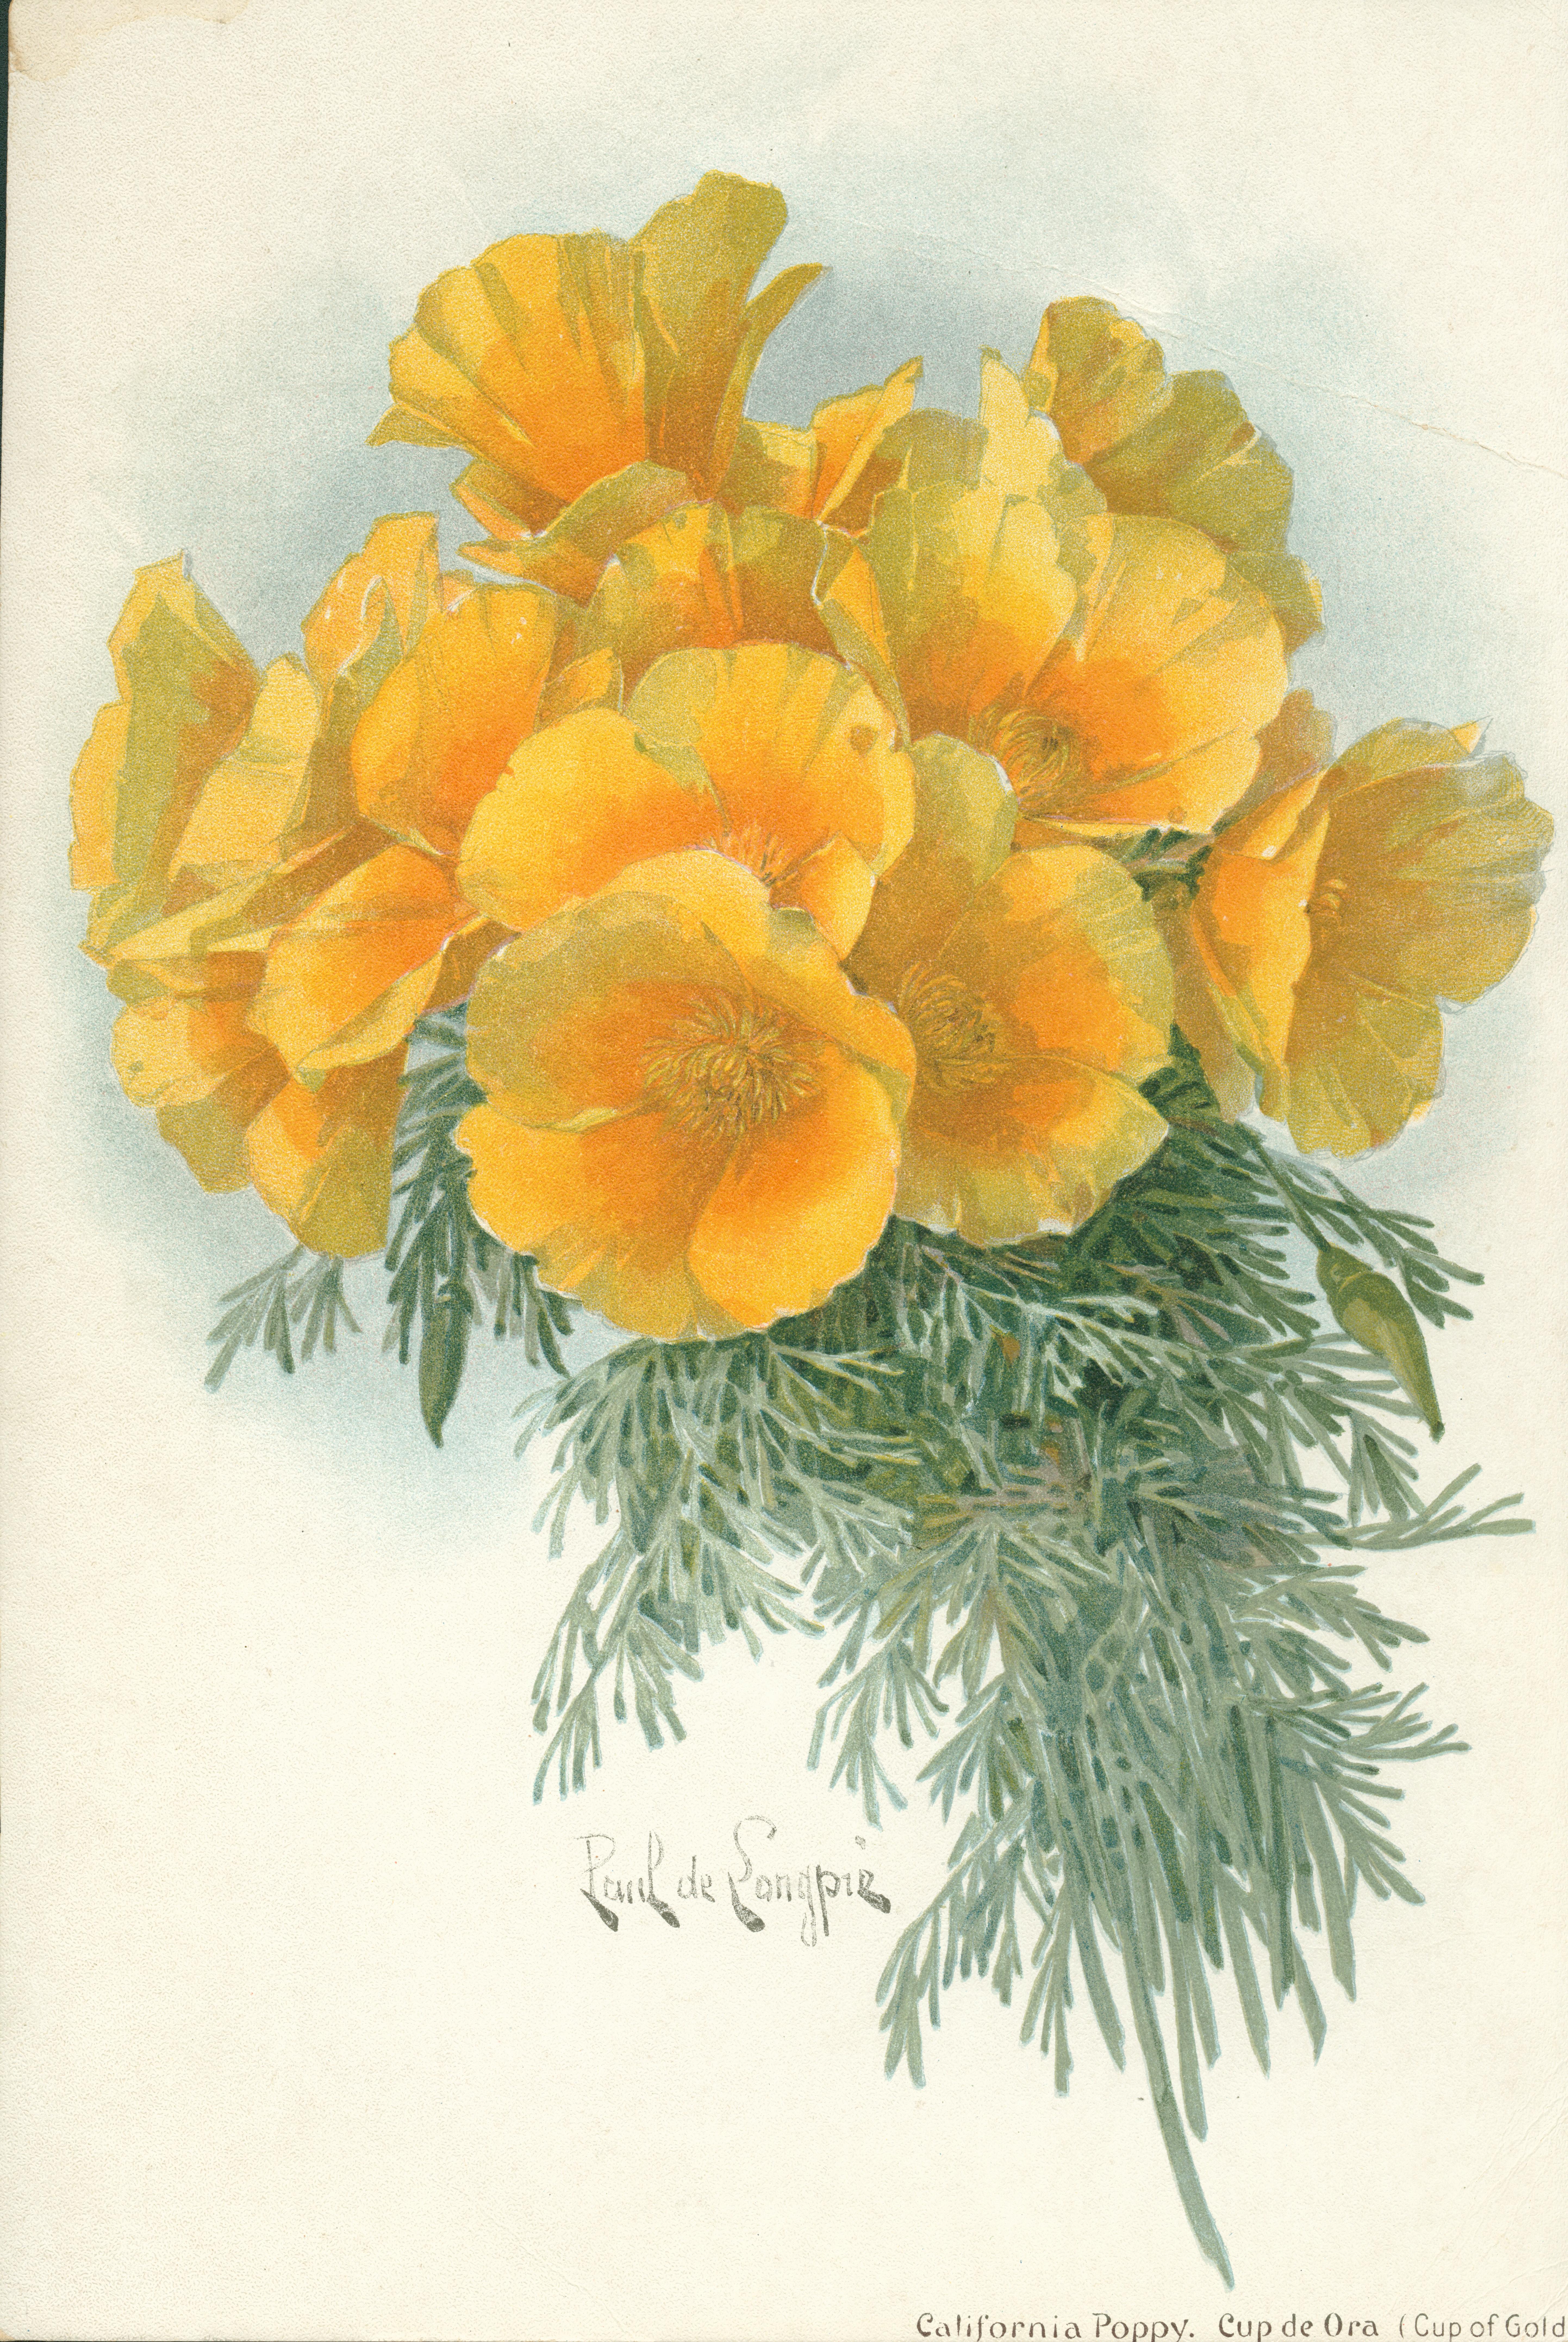 Shows a bouquet of California poppies